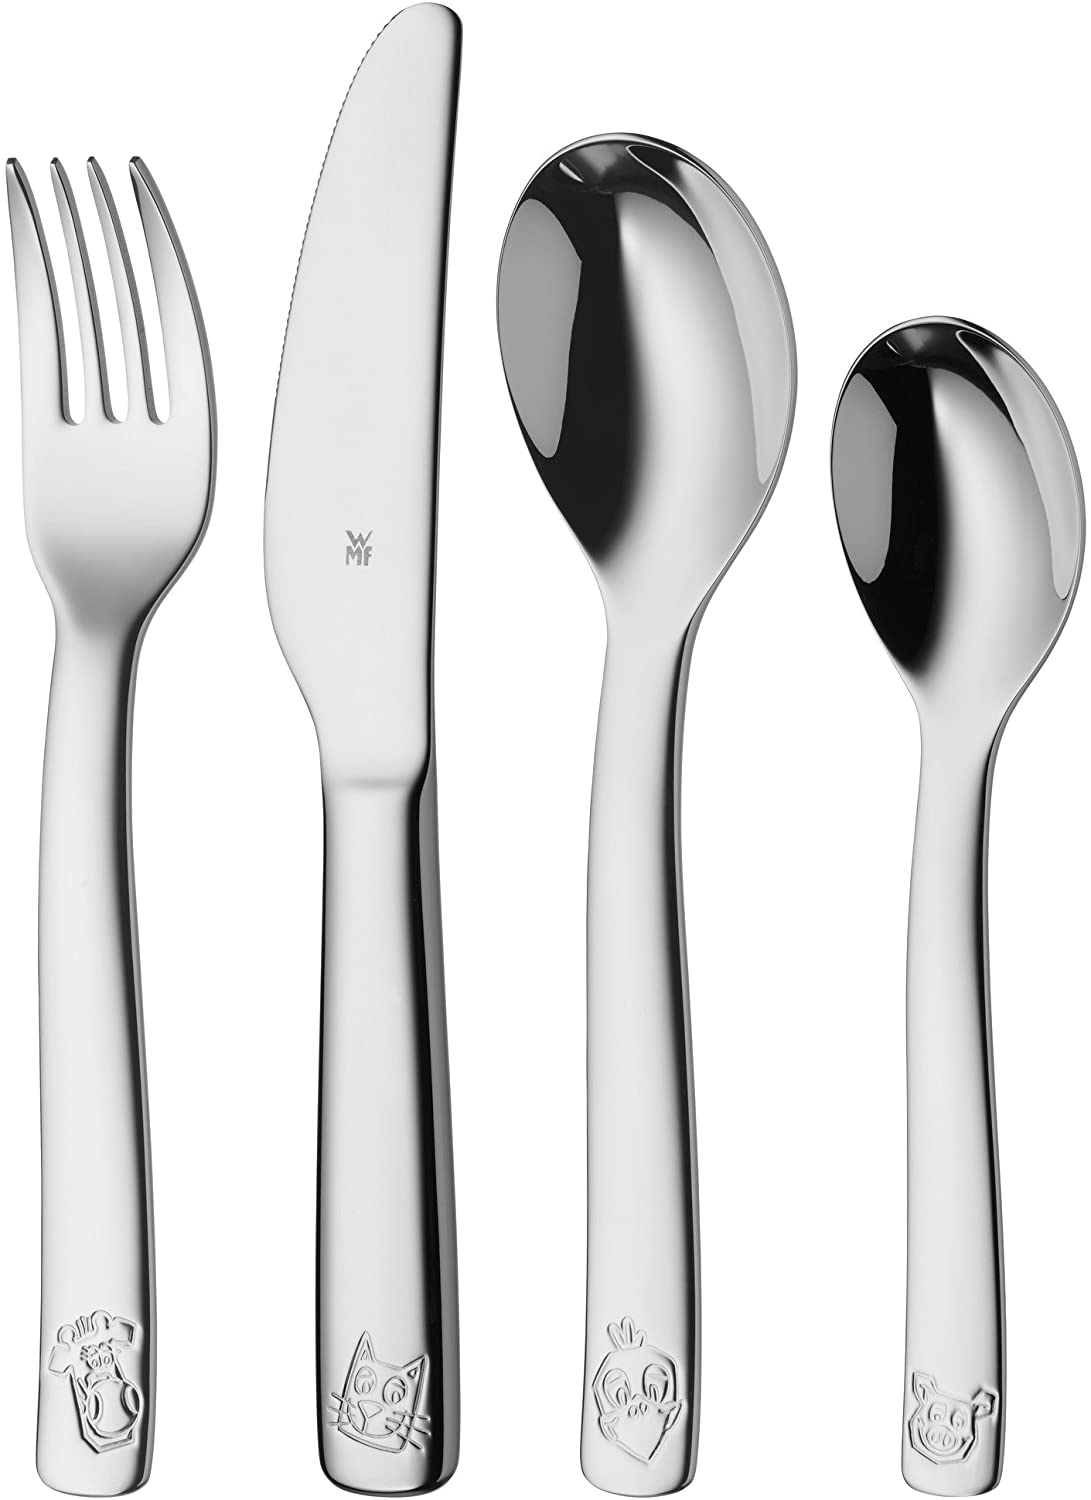 WMF 4-Piece Children\'s Farm Cutlery Set, for 3 Years and over, Polished Cromargan Stainless Steel, Dishwasher-Safe, 40 x 25 x 25 cm